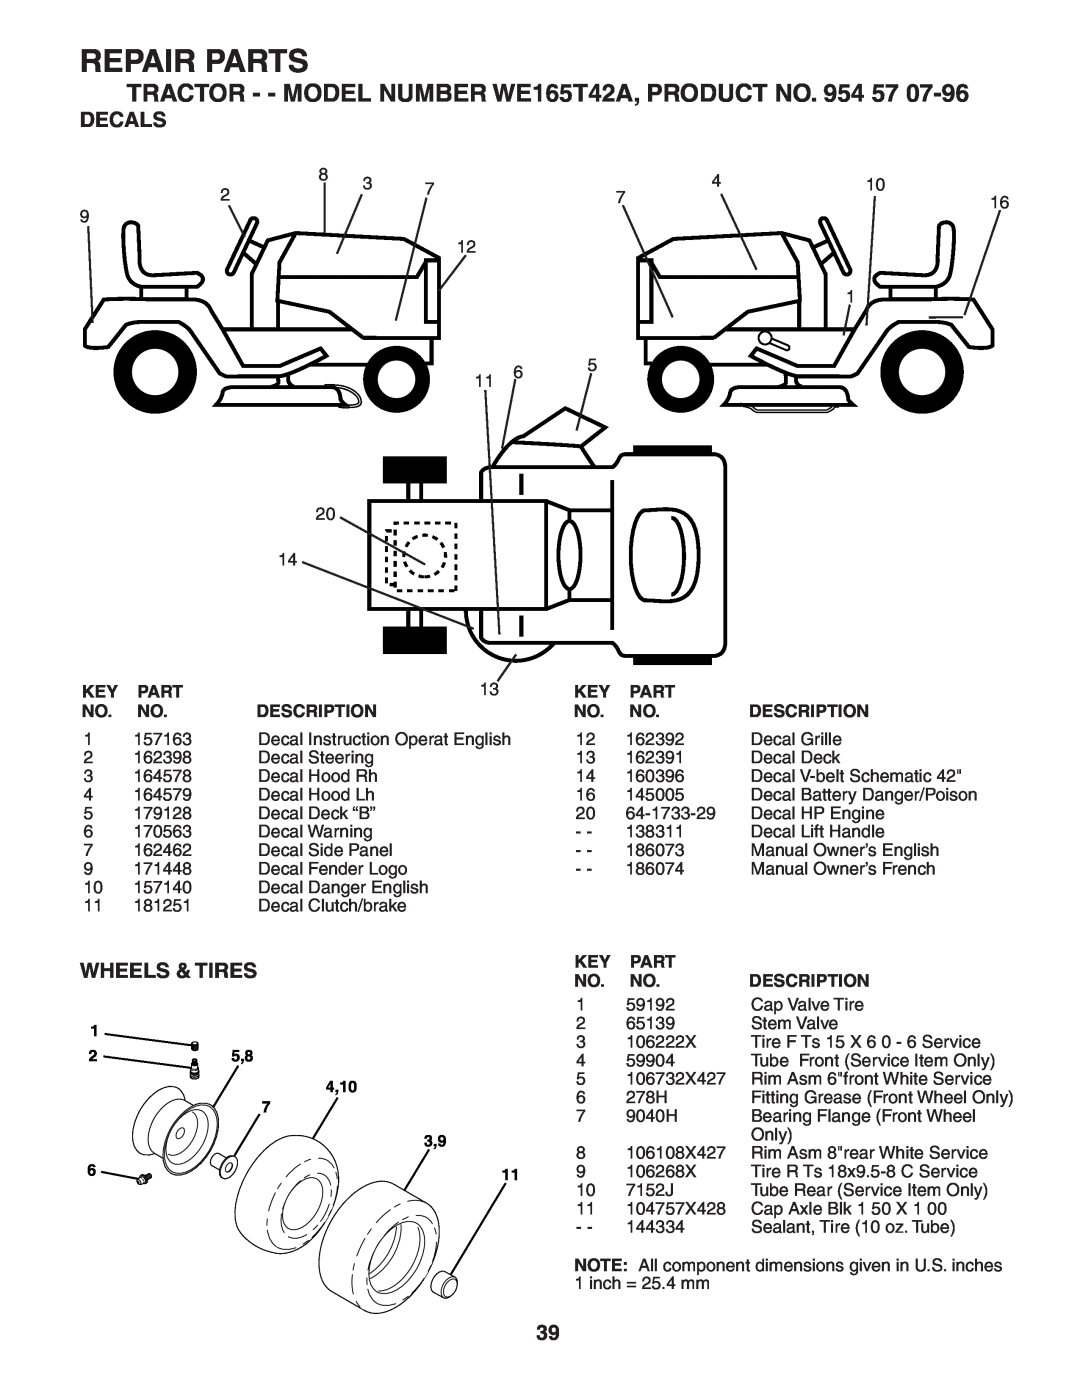 Weed Eater Decals, Wheels & Tires, Repair Parts, TRACTOR - - MODEL NUMBER WE165T42A, PRODUCT NO. 954 57, 25,8 4,10 